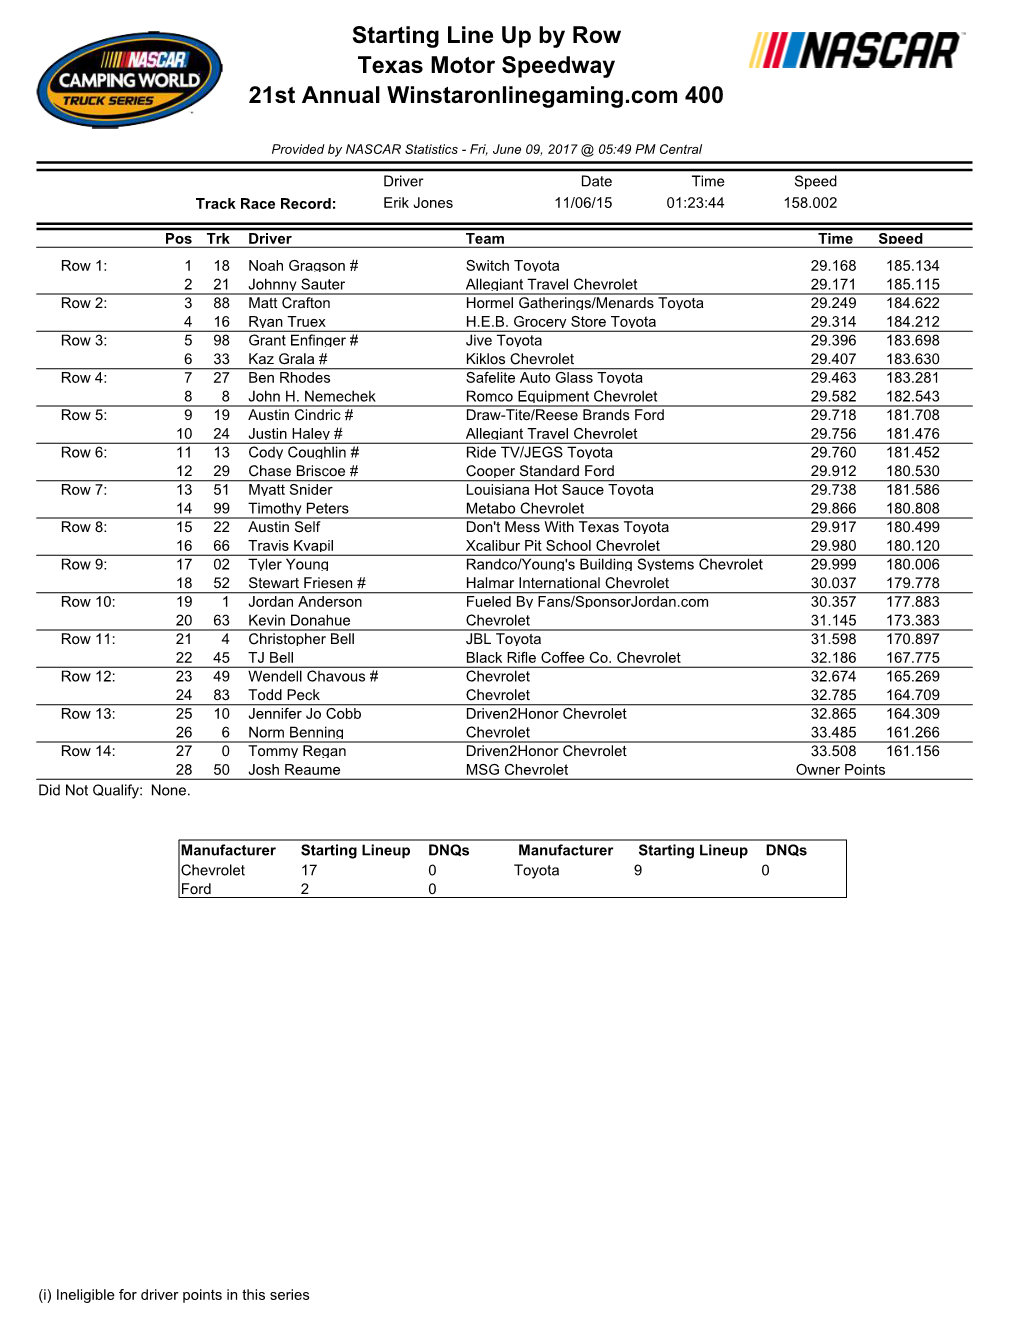 Starting Line up by Row Texas Motor Speedway 21St Annual Winstaronlinegaming.Com 400